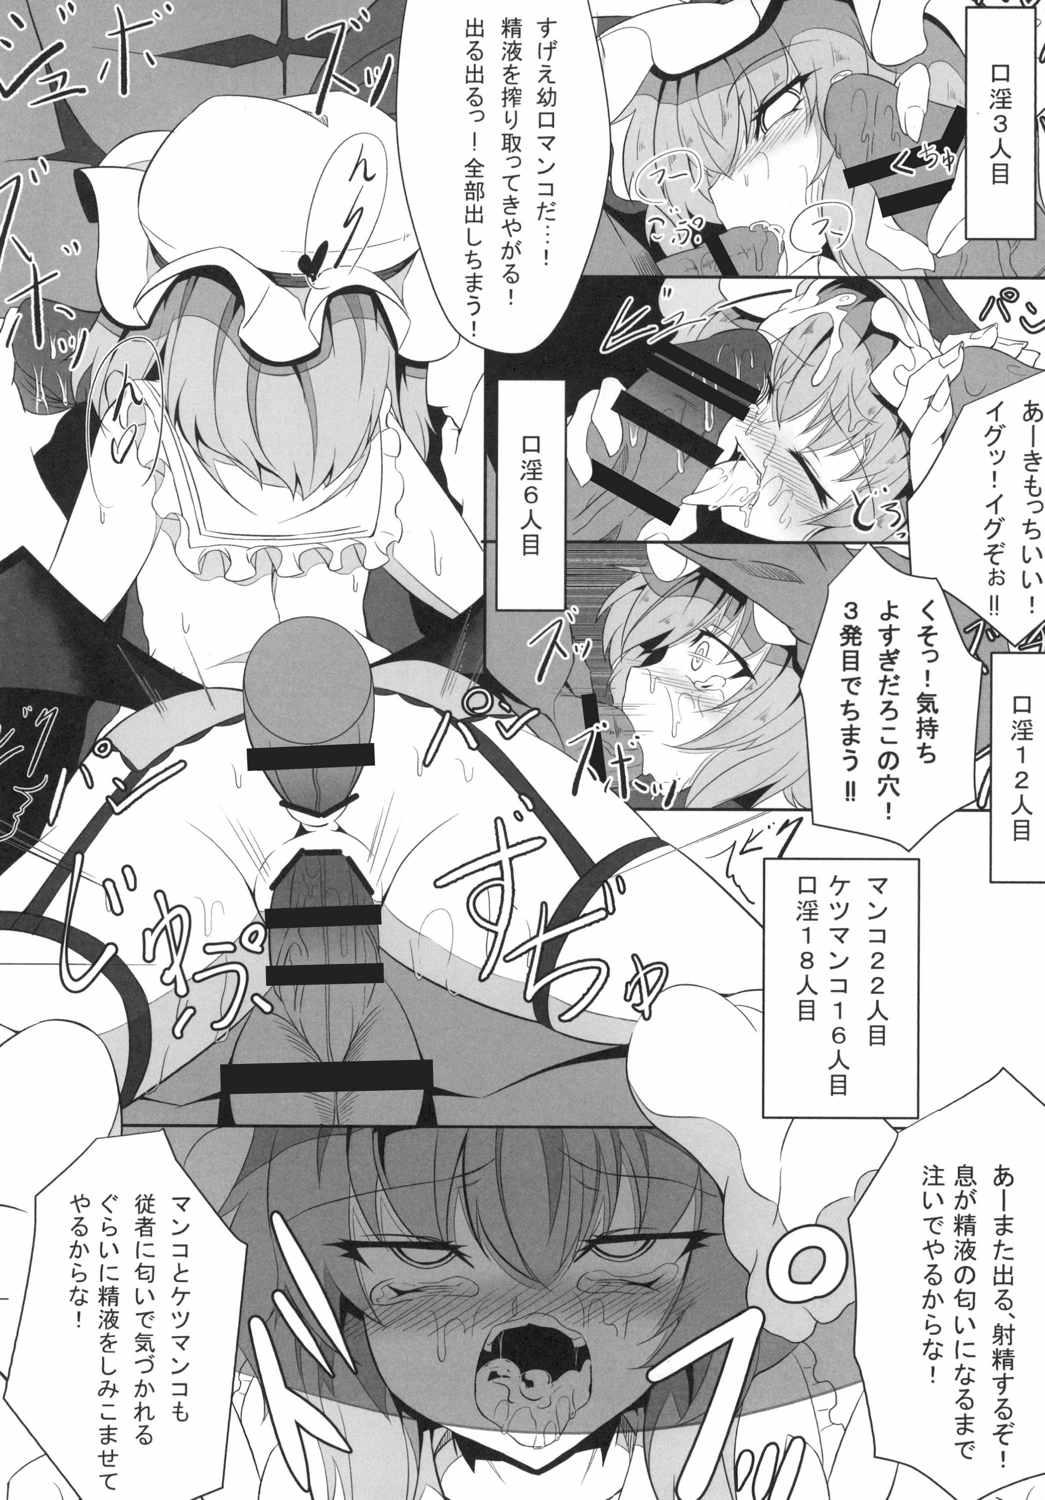 Caught M.P. Vol. 4 - Touhou project Cam - Page 11